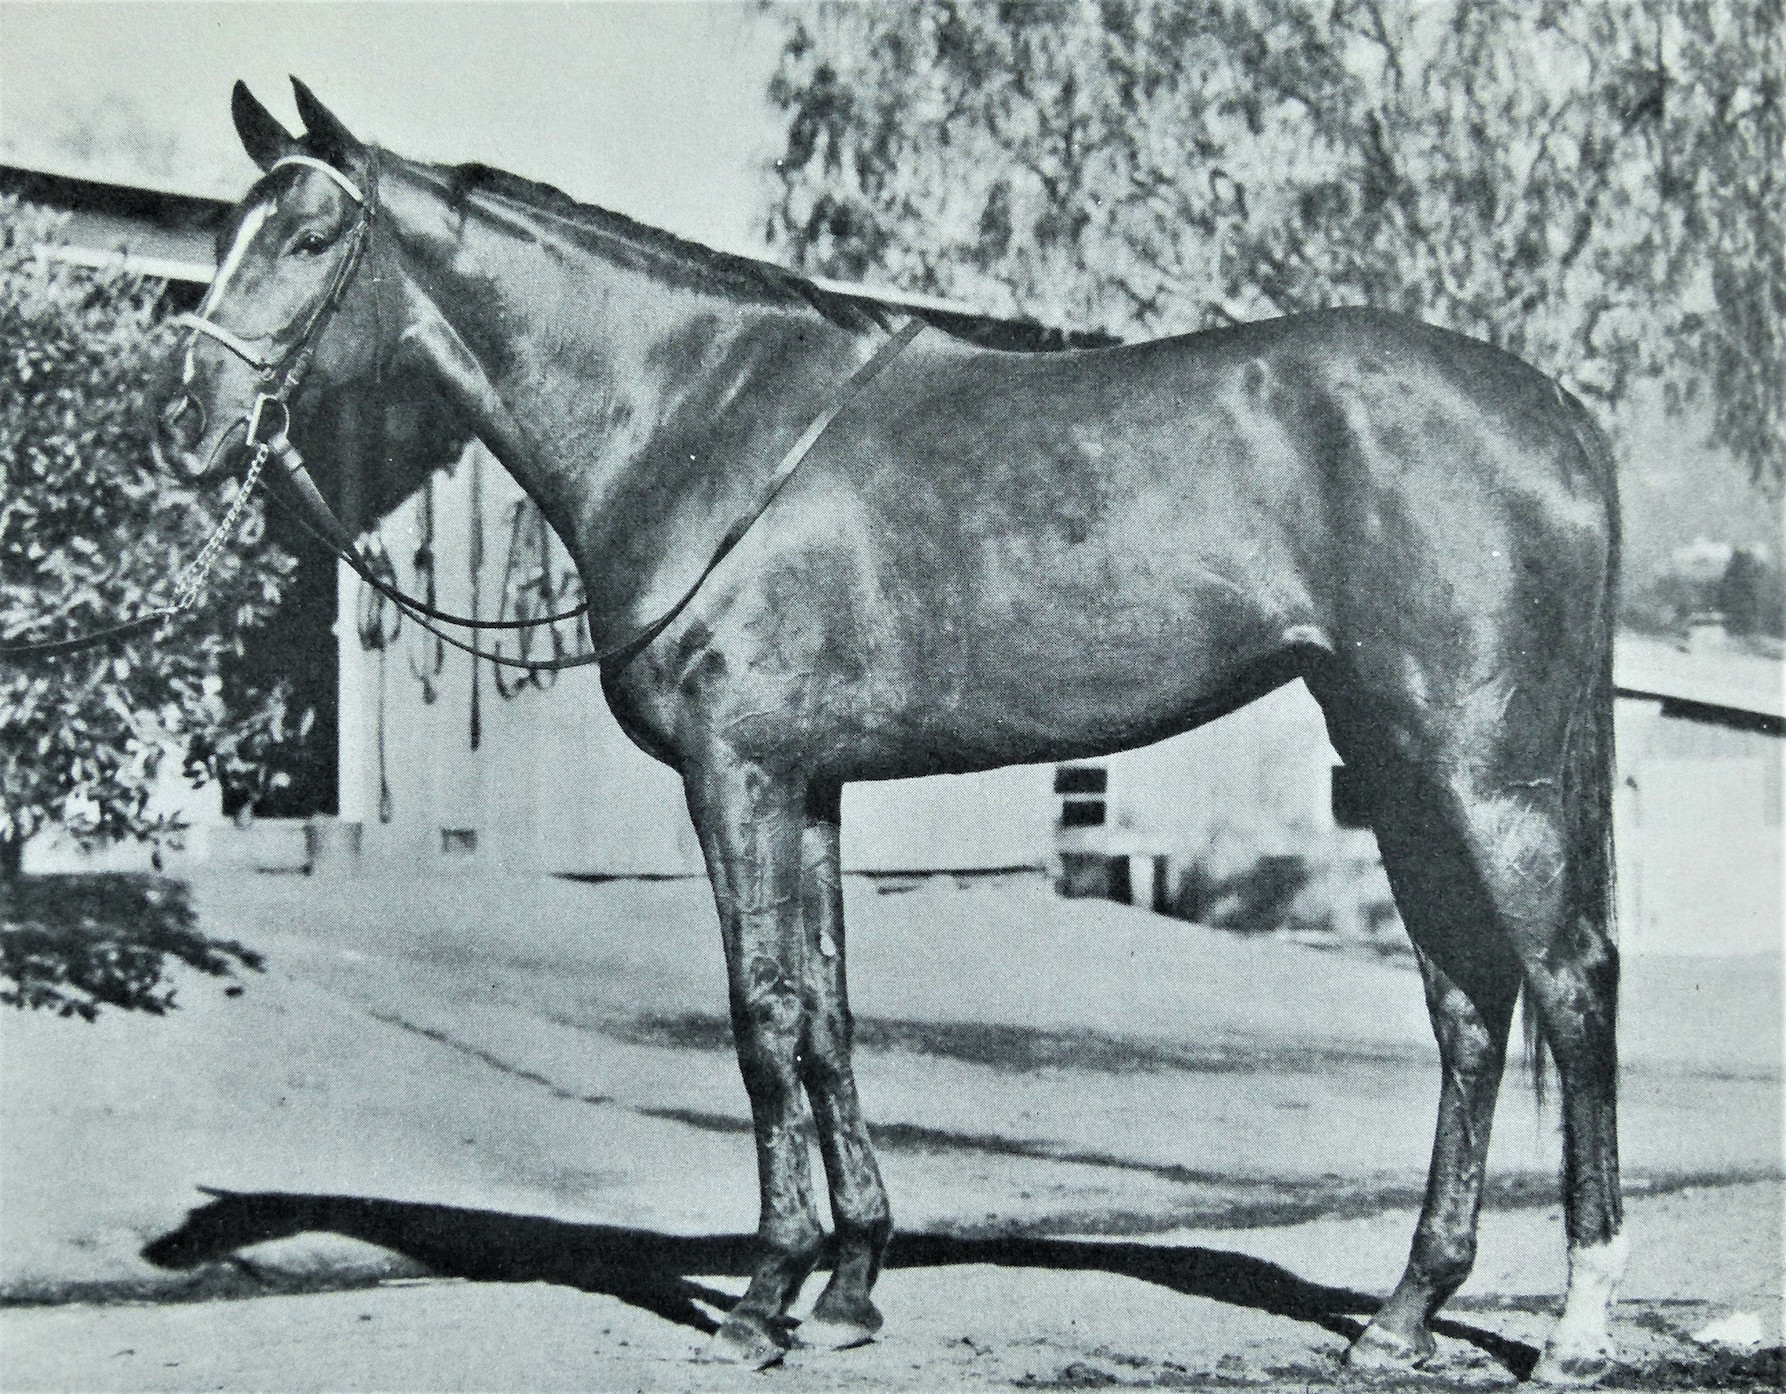 Miss Grillo was bred to some of the best stallions of the era and produced 11 foals